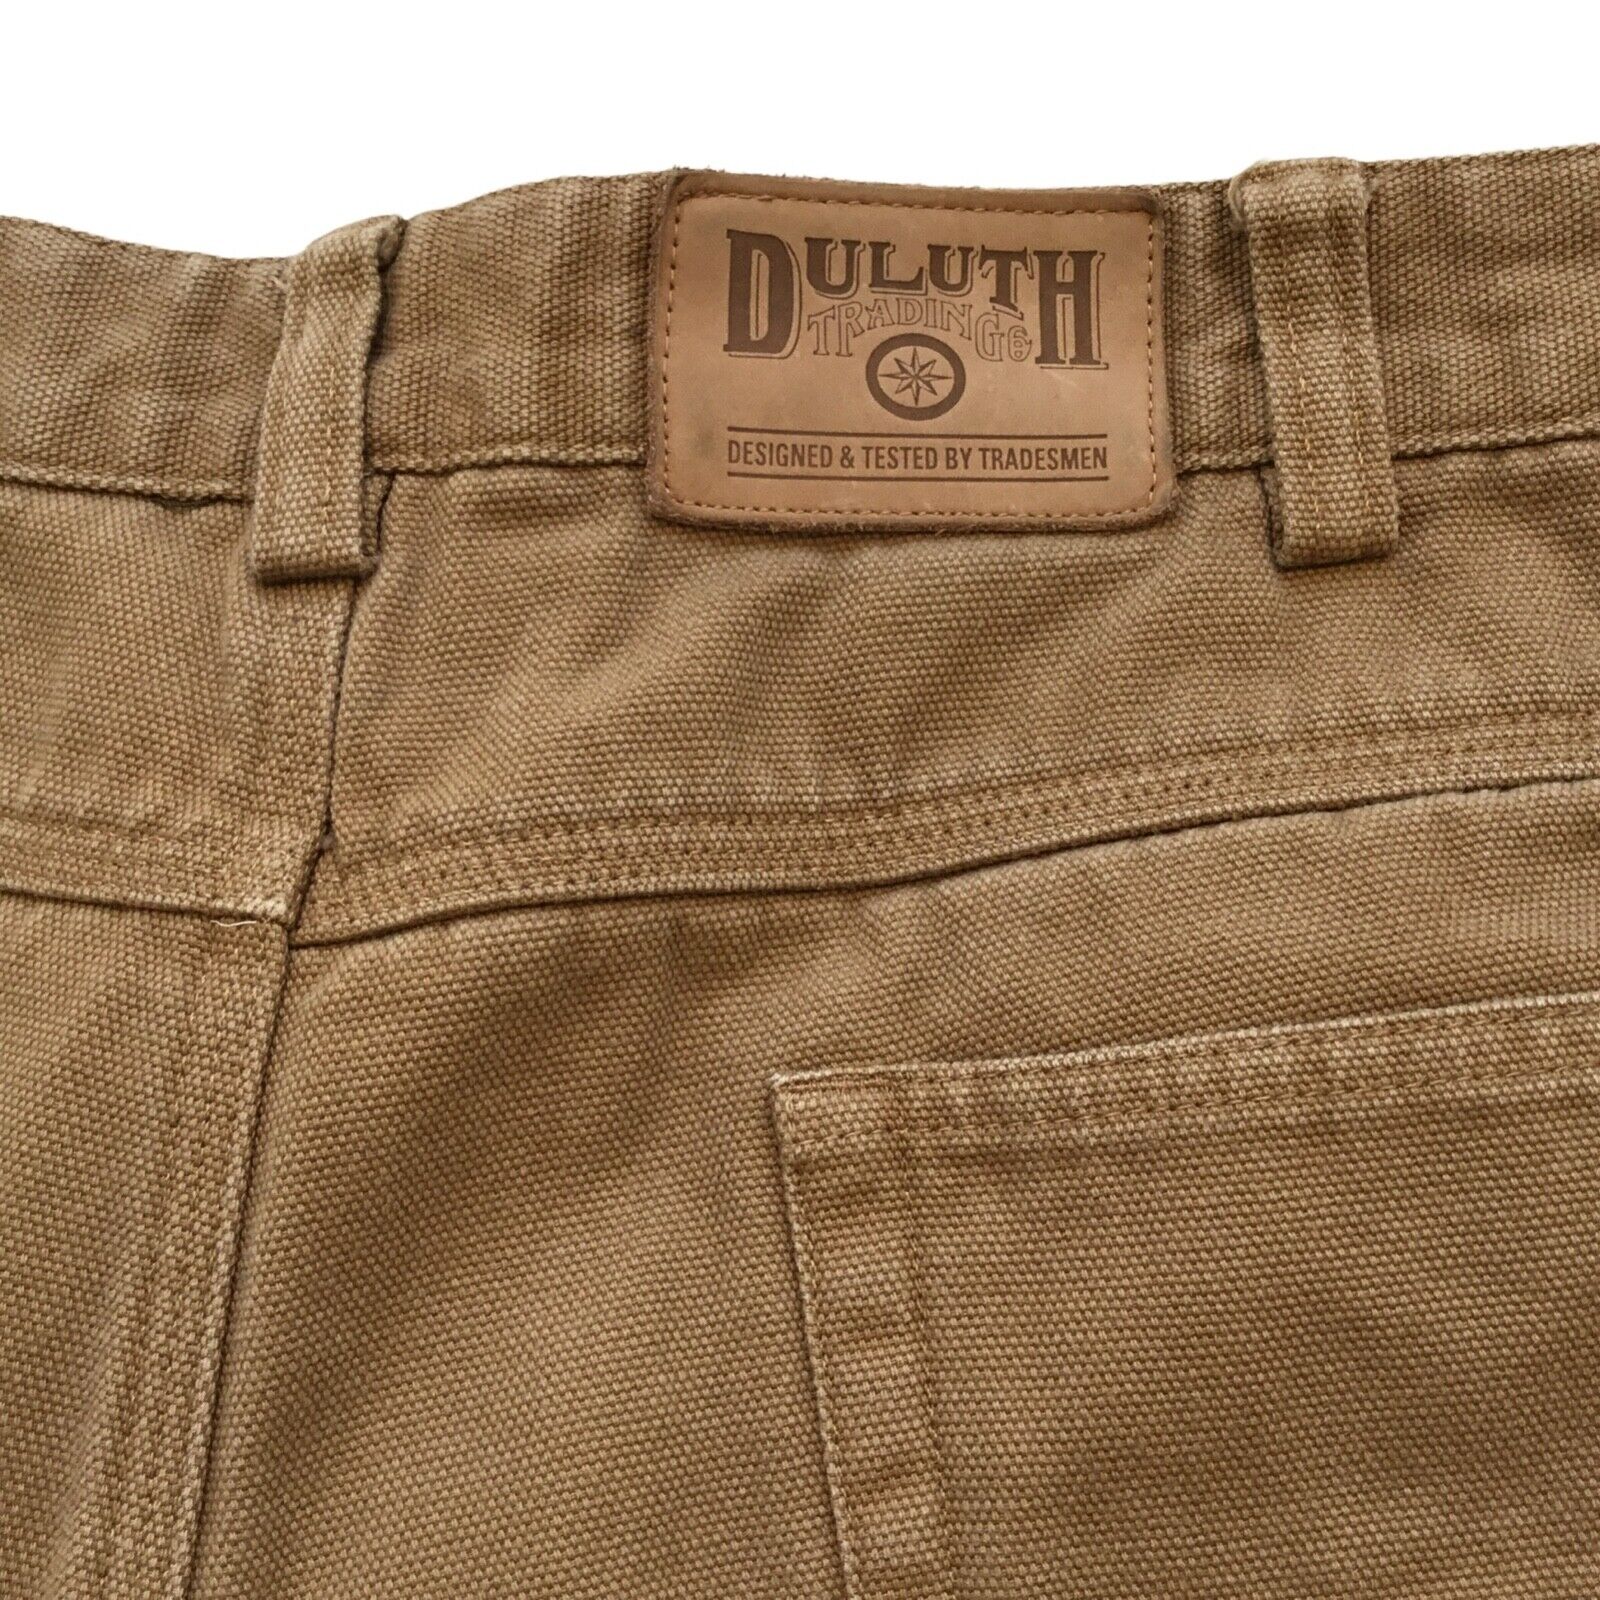 Duluth Trading Co Fire Hose Work Pants Men’s 44 x… - image 5